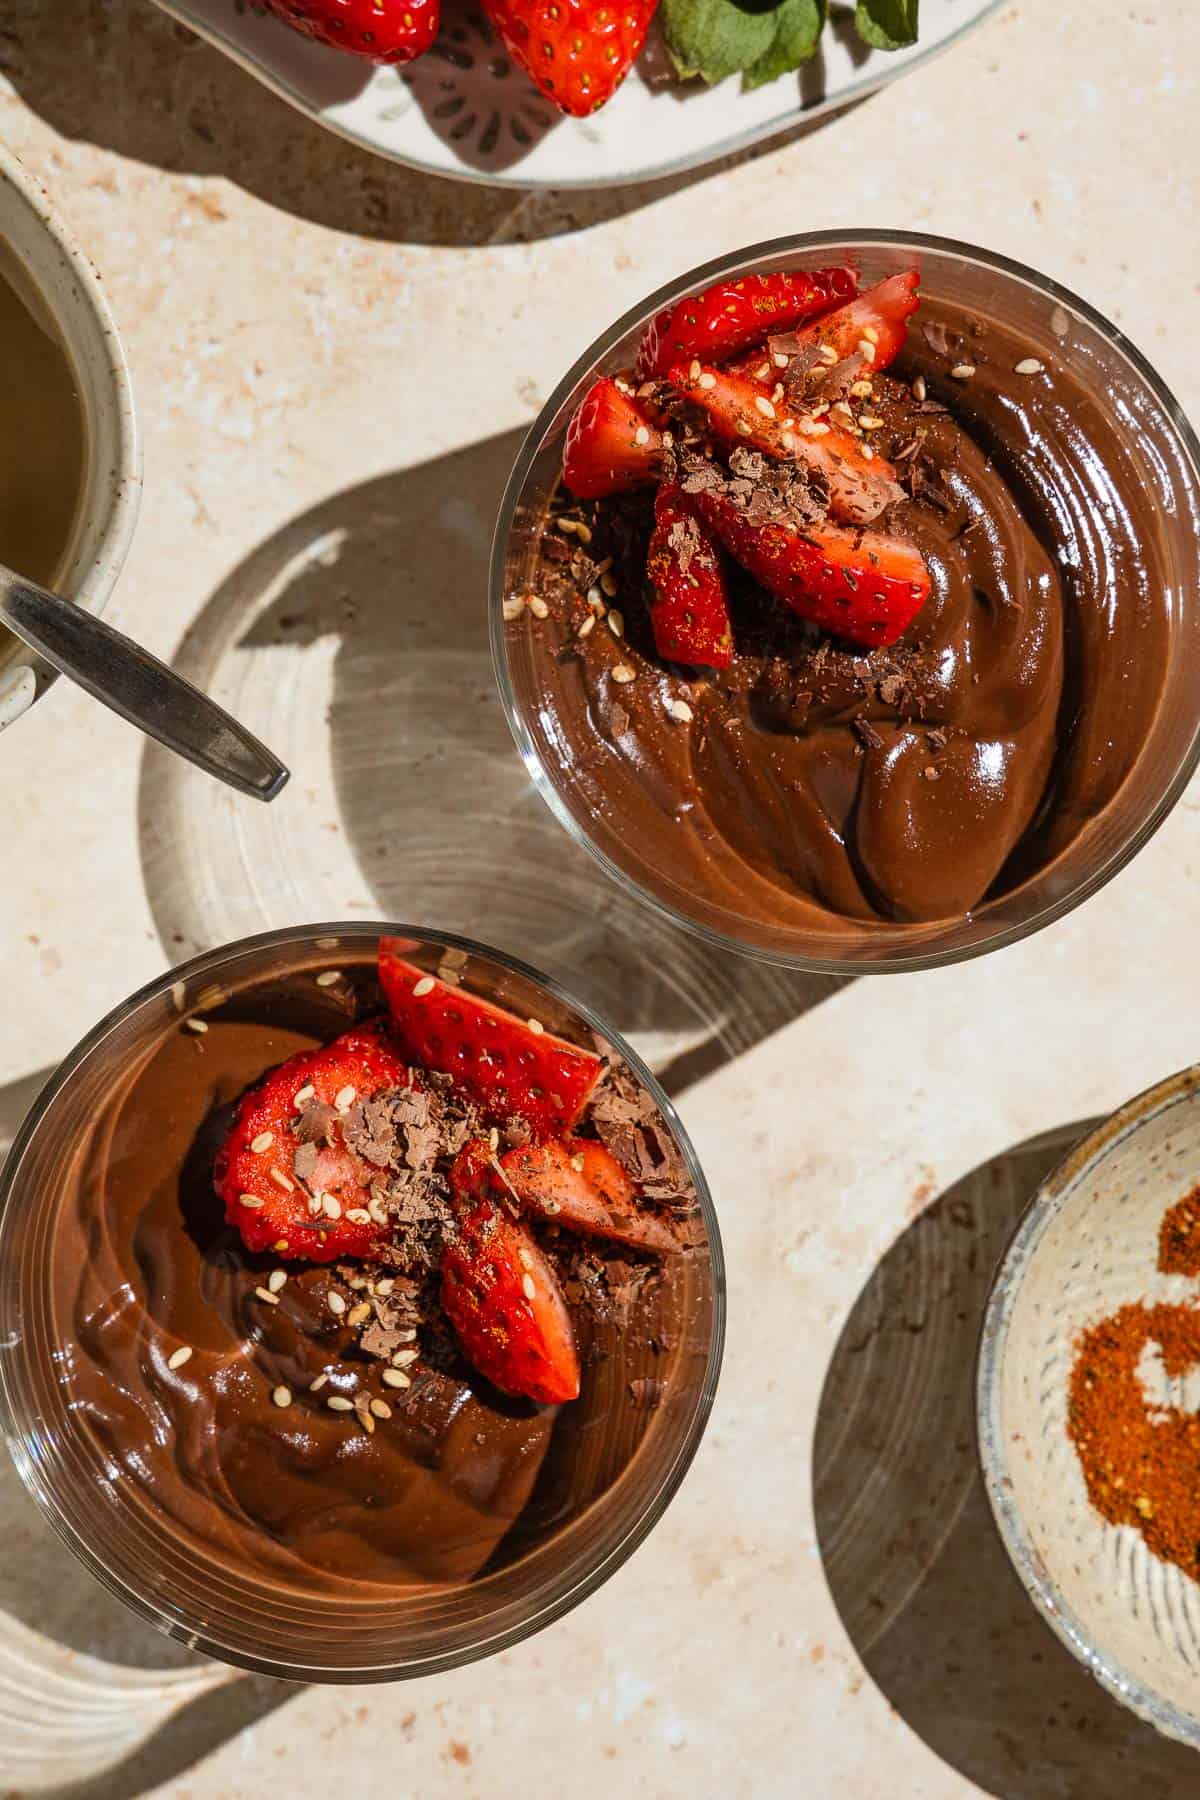 An overhead photo of two bowls of vegan chocolate pudding garnished with sliced fresh strawberries.